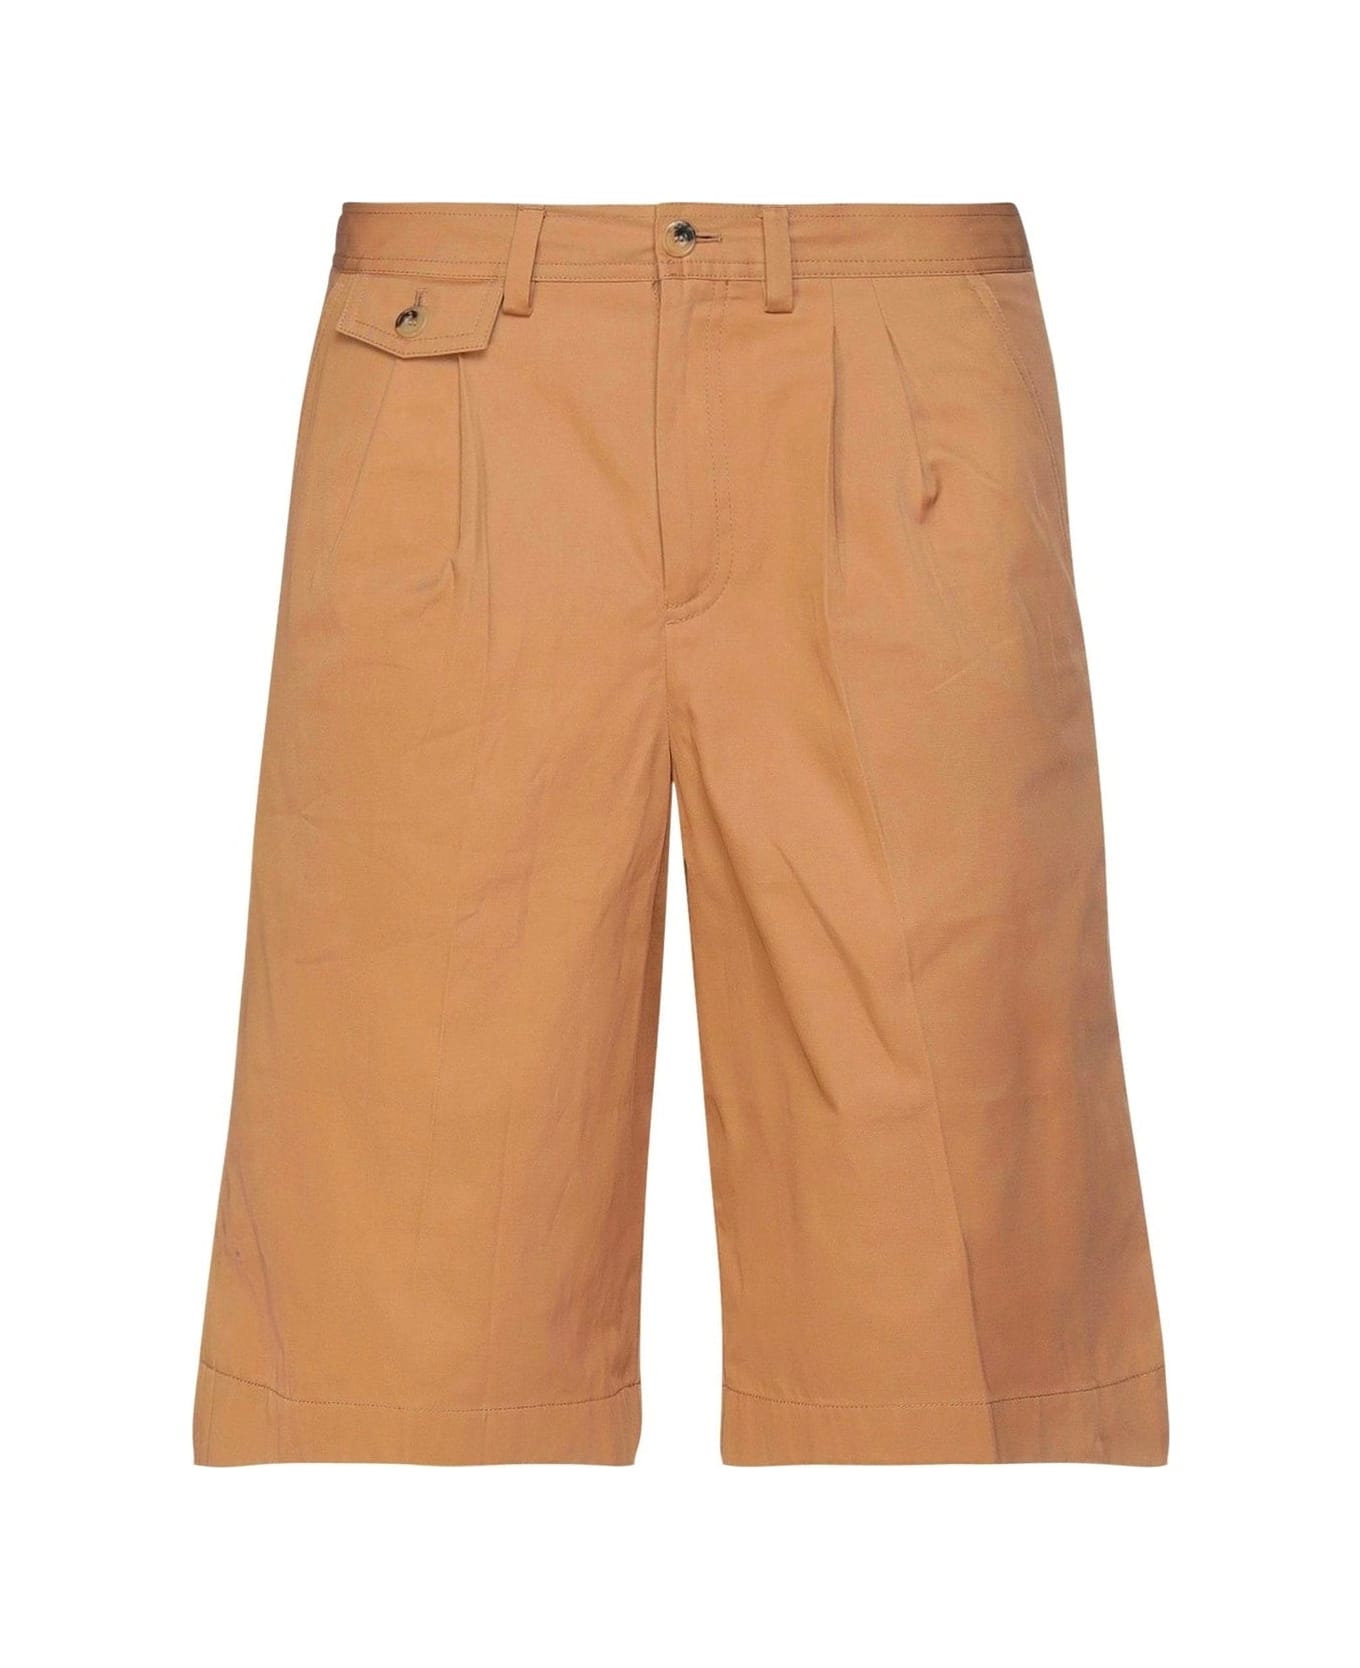 Burberry Cotton Shorts - Brown